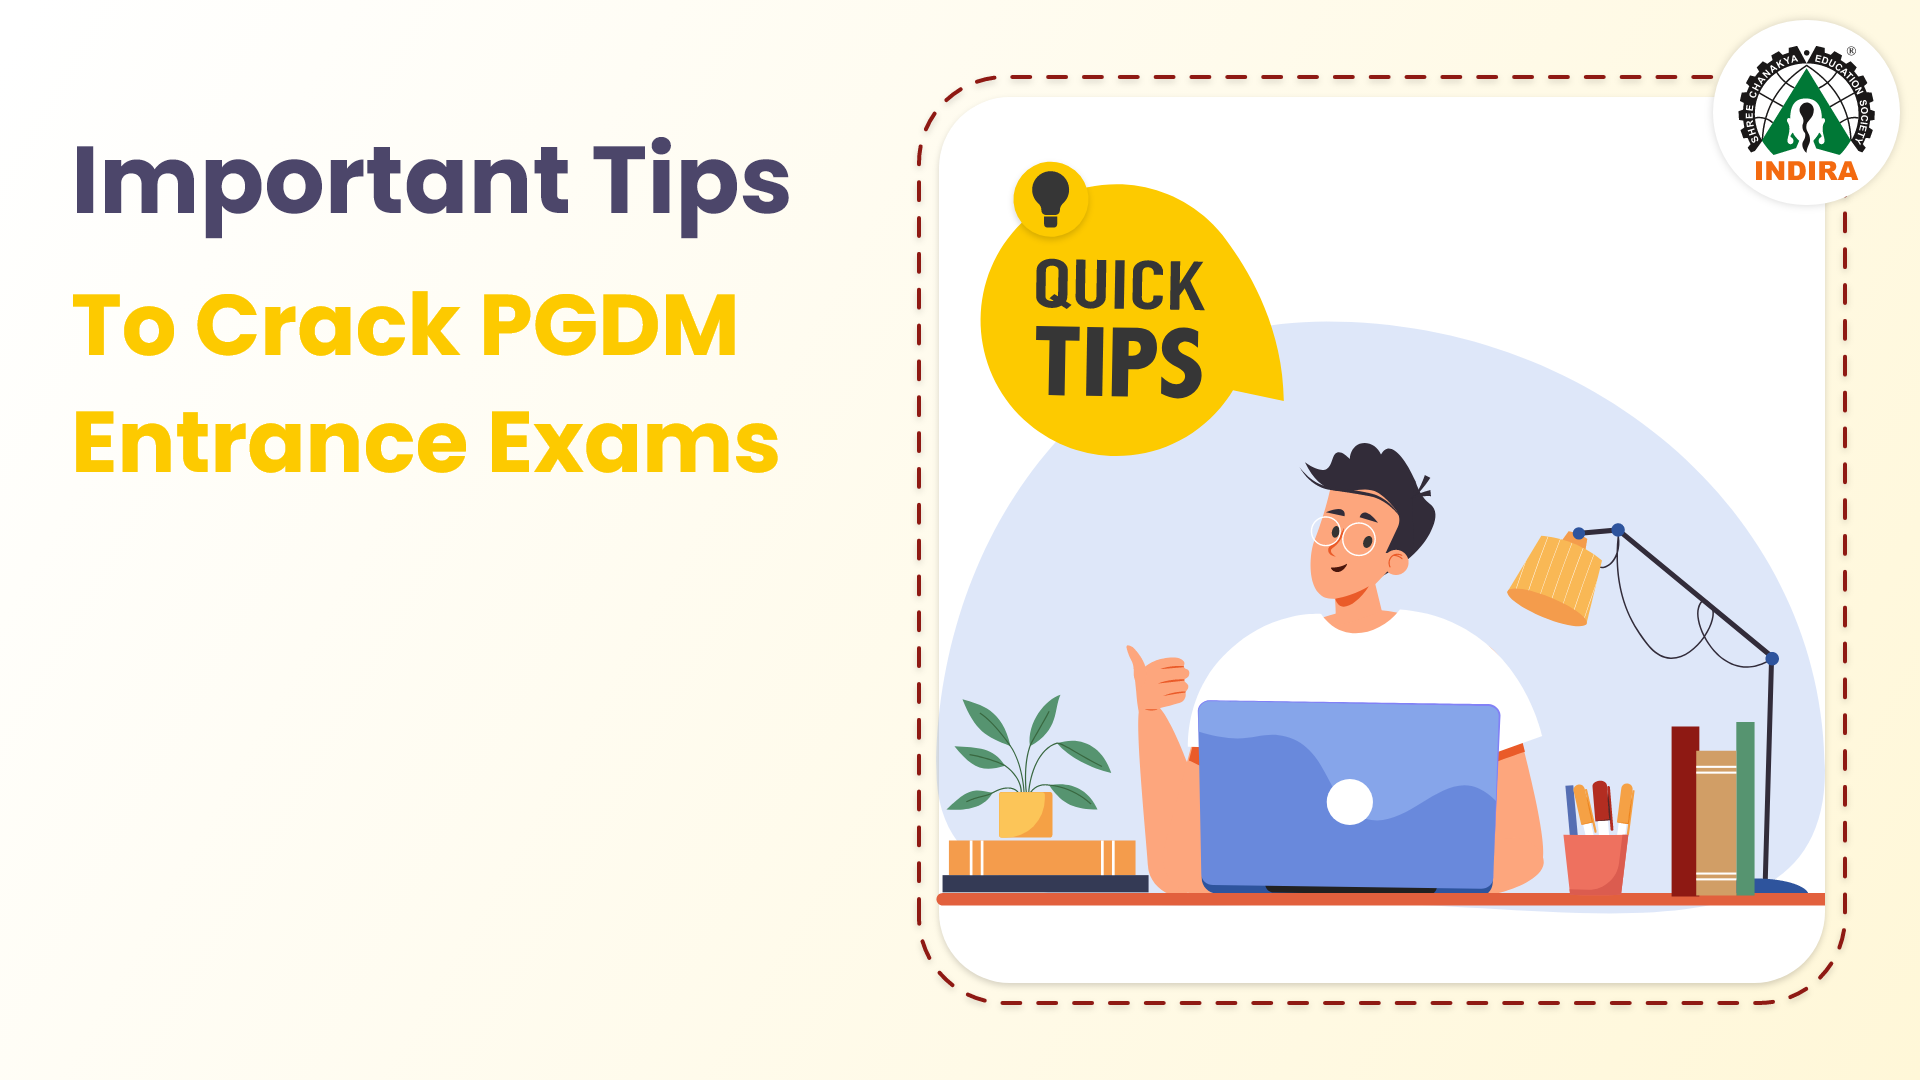 Important tips to crack PGDM Entrance Exams